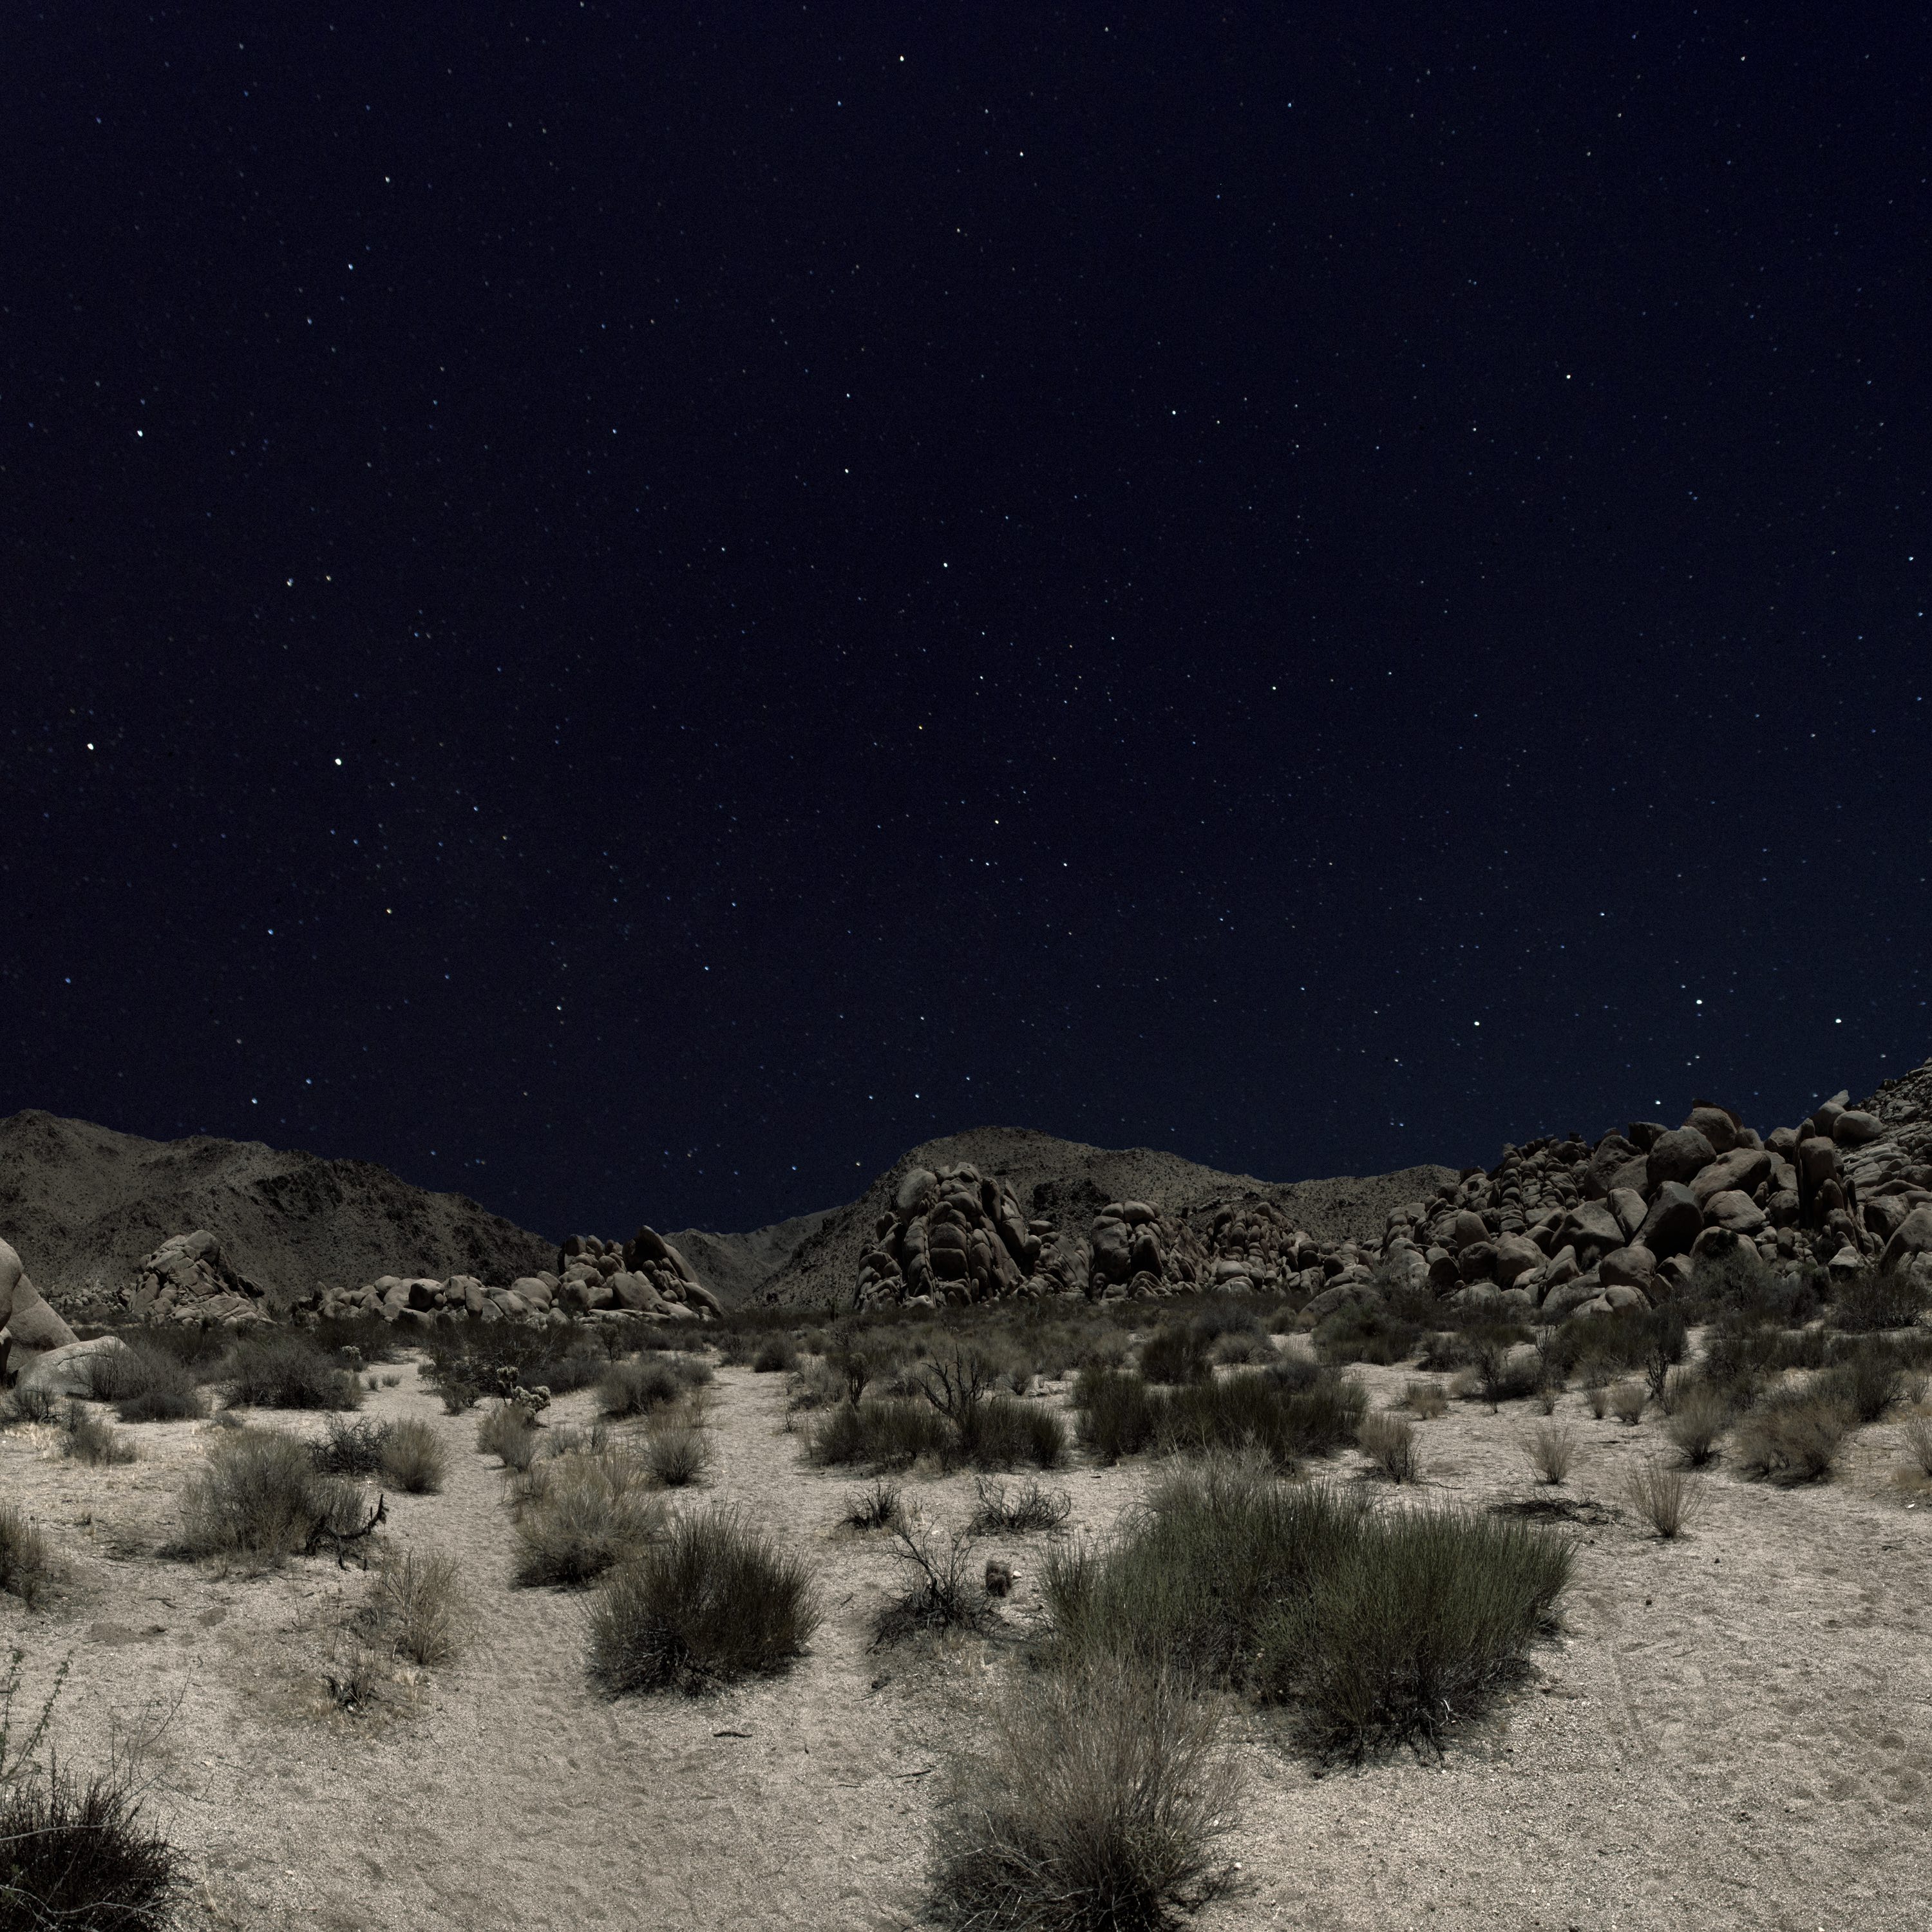 Artwork featuring image of desert landscape and mountains opening up to star-filled sky